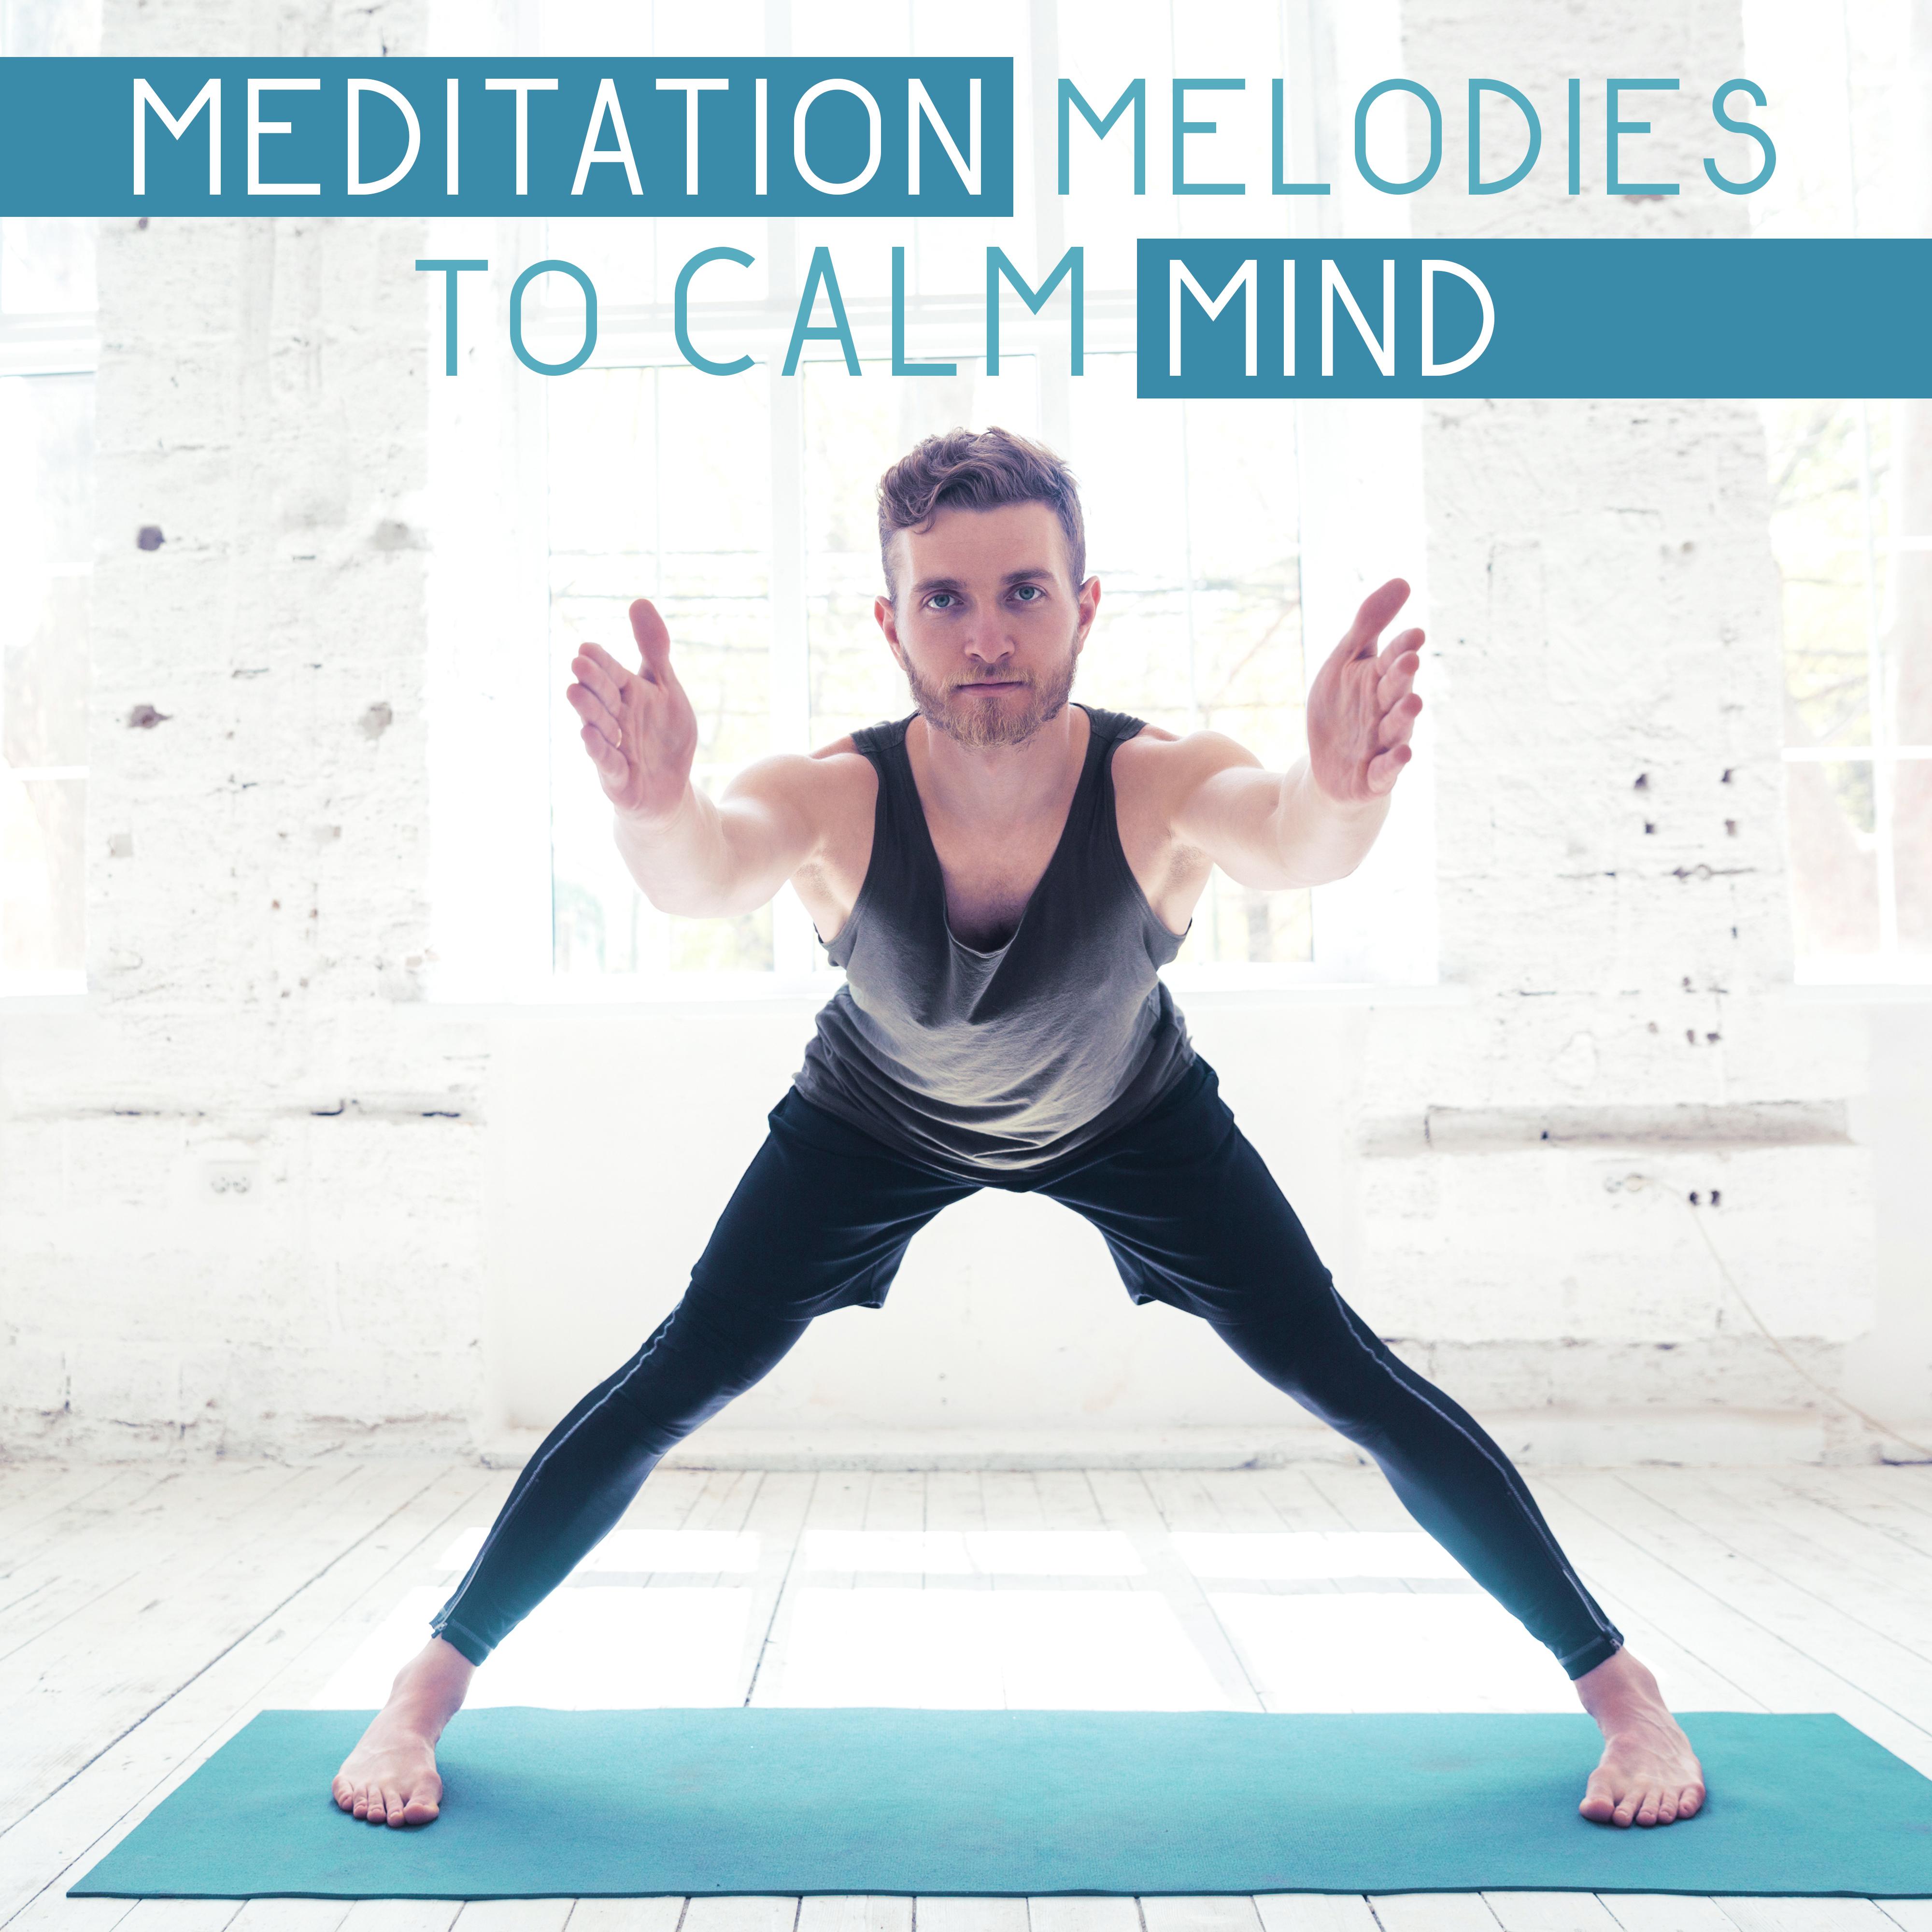 Meditation Melodies to Calm Mind